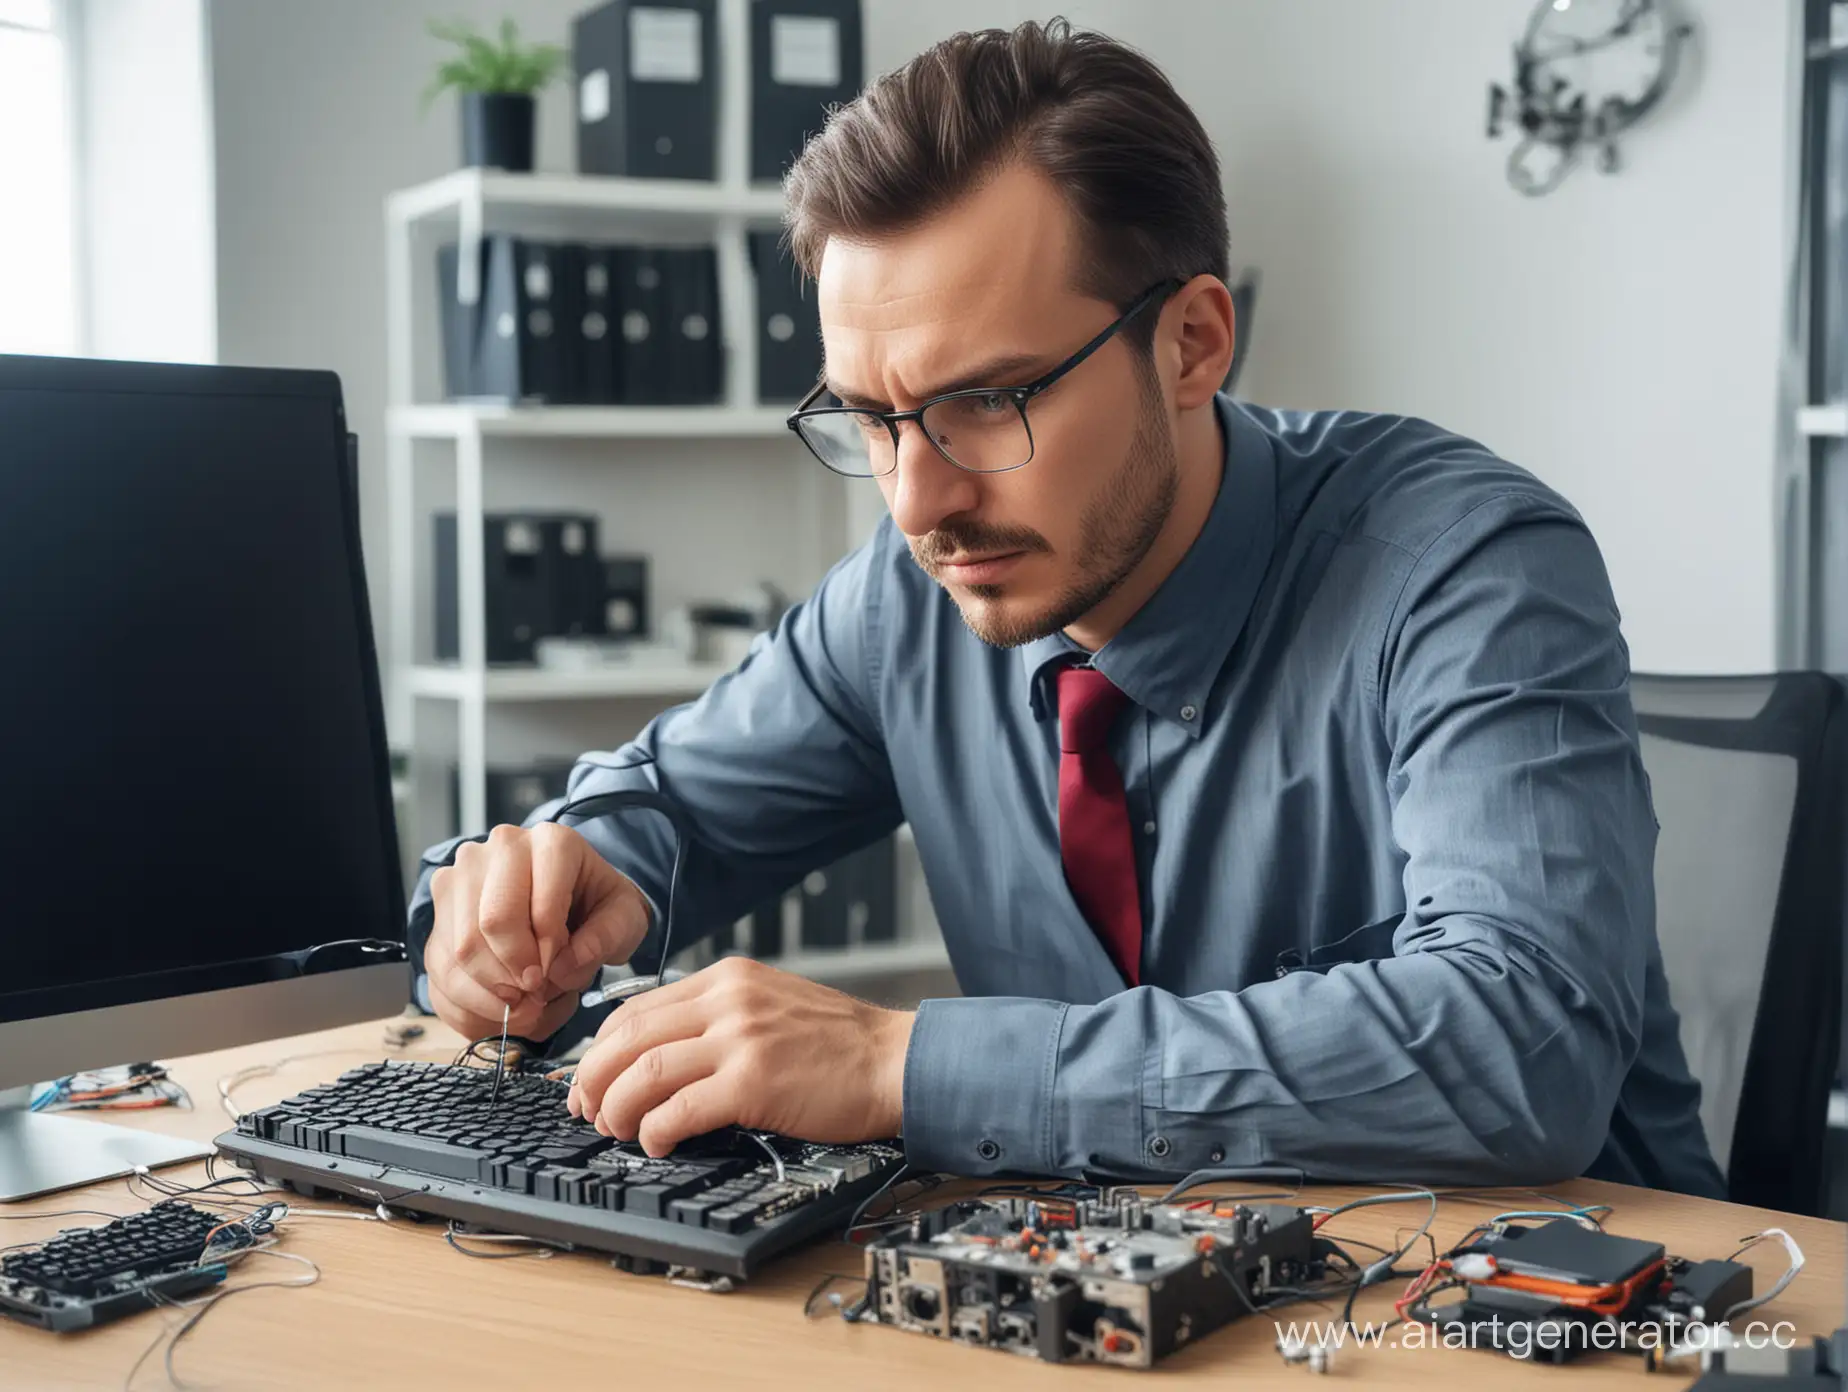 Master-Technician-in-Glasses-Repairs-Computer-in-Office-Setting